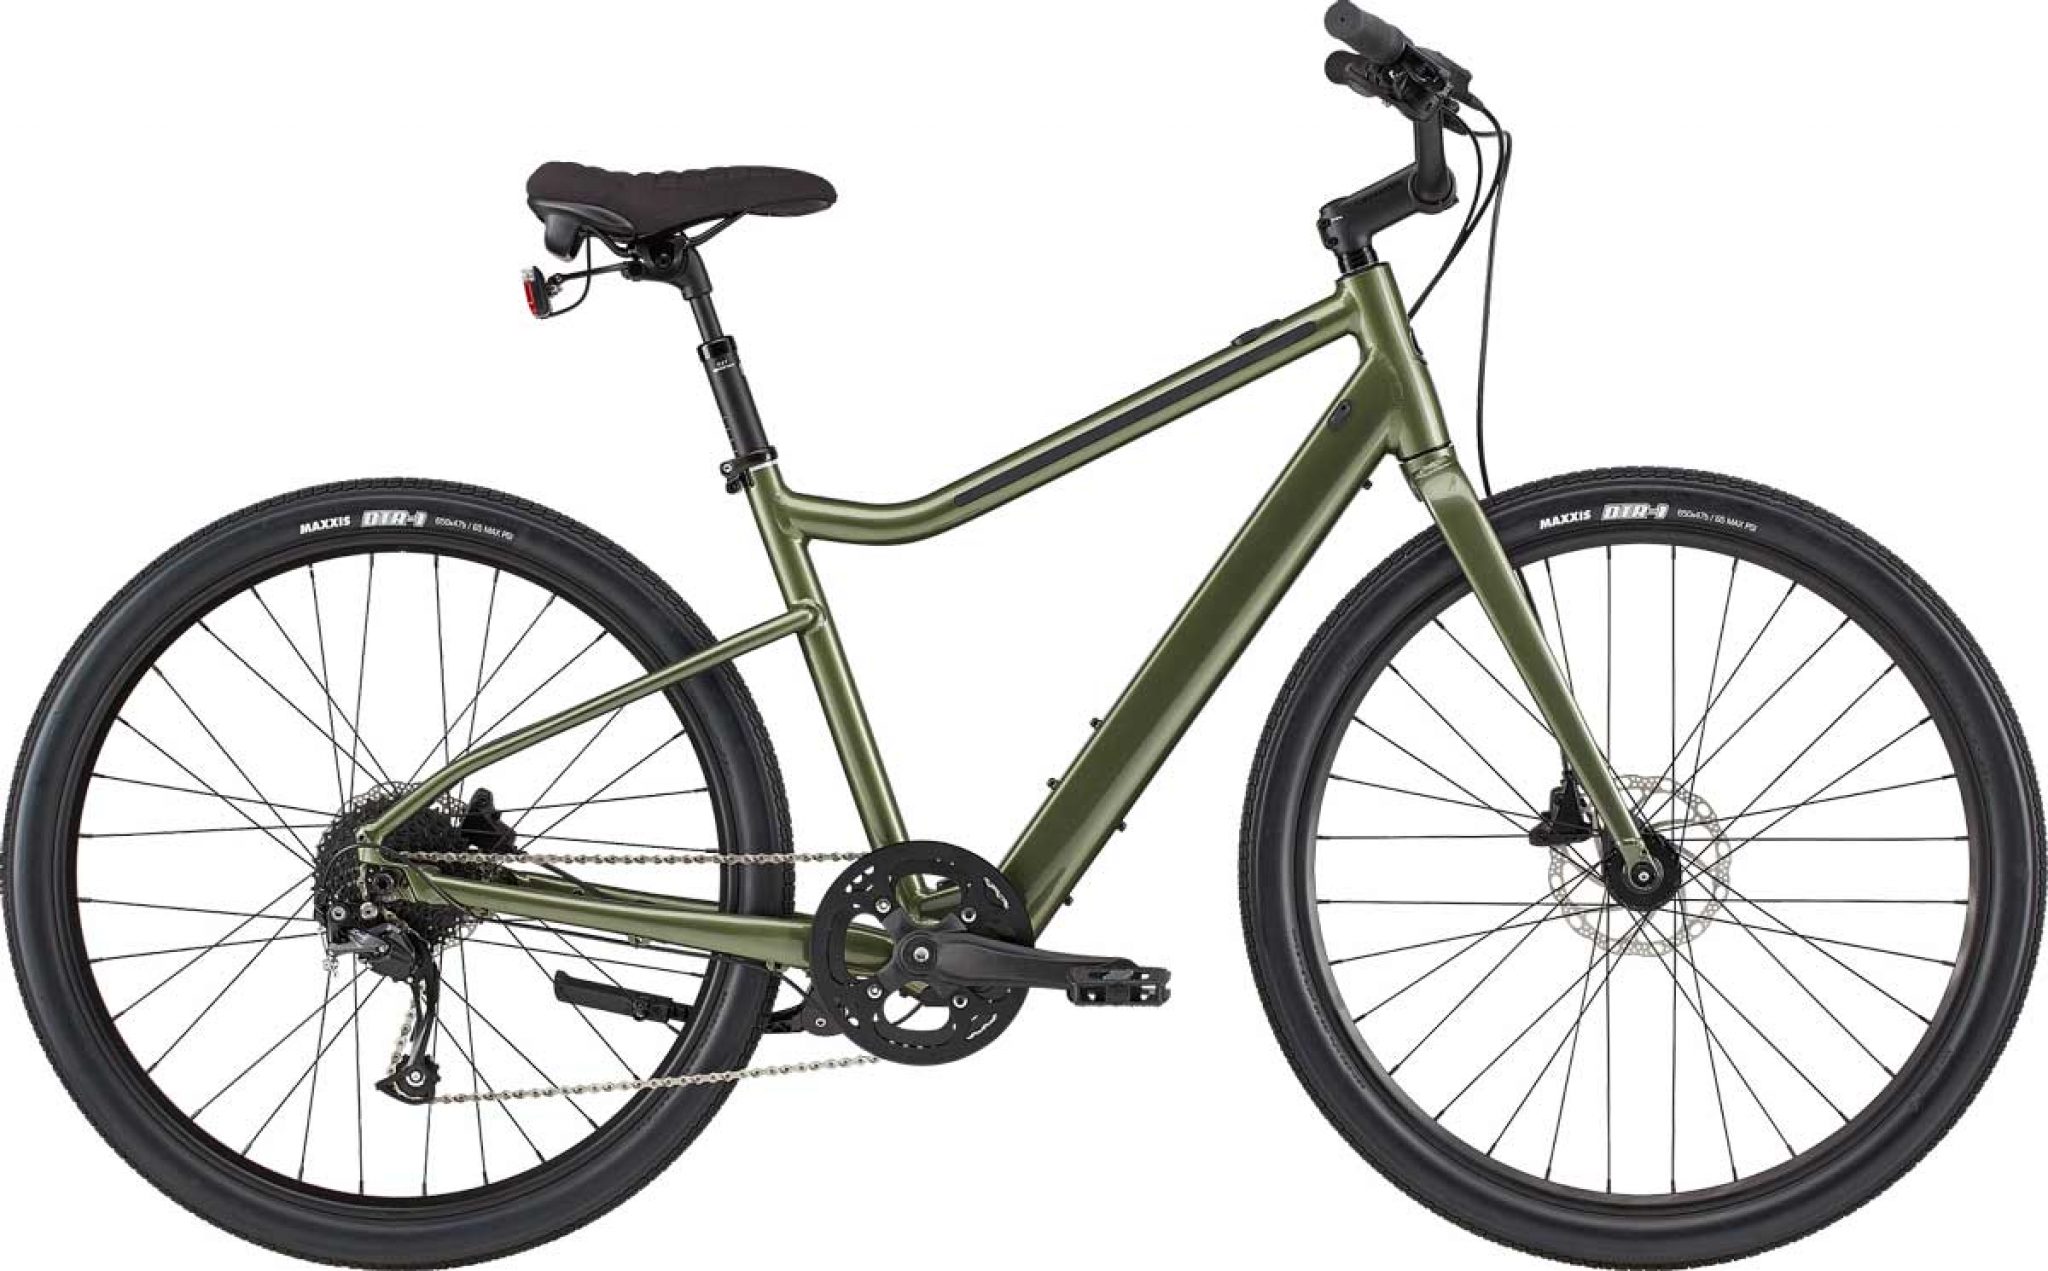 Best Cannondale Electric Bikes in 2021 Reviewed | We Are The Cyclists